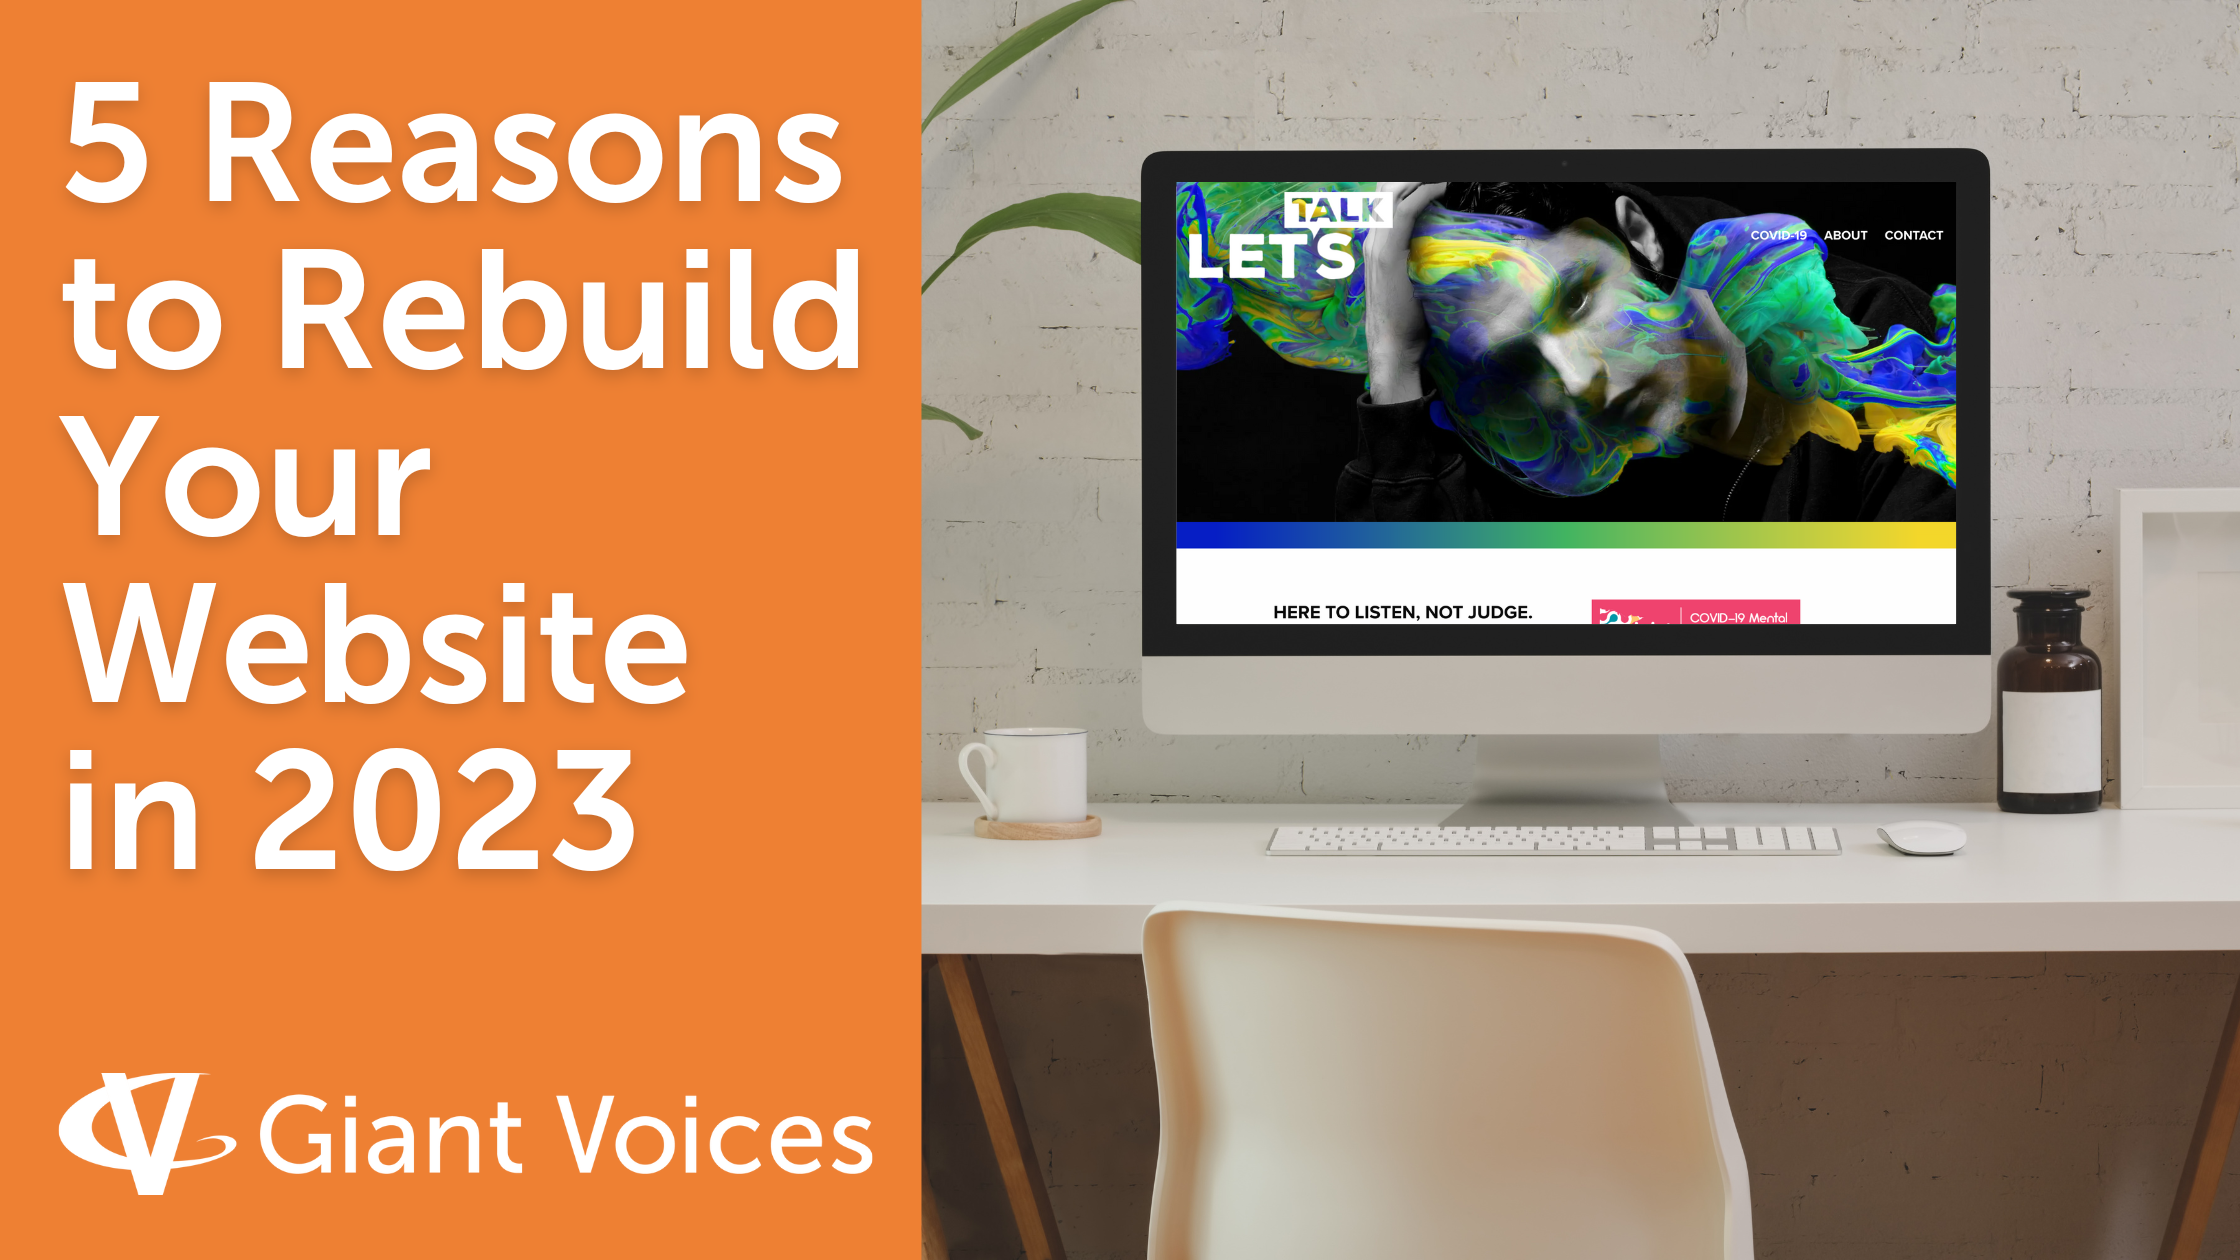 5 Reasons to Rebuild Your Website in 2023